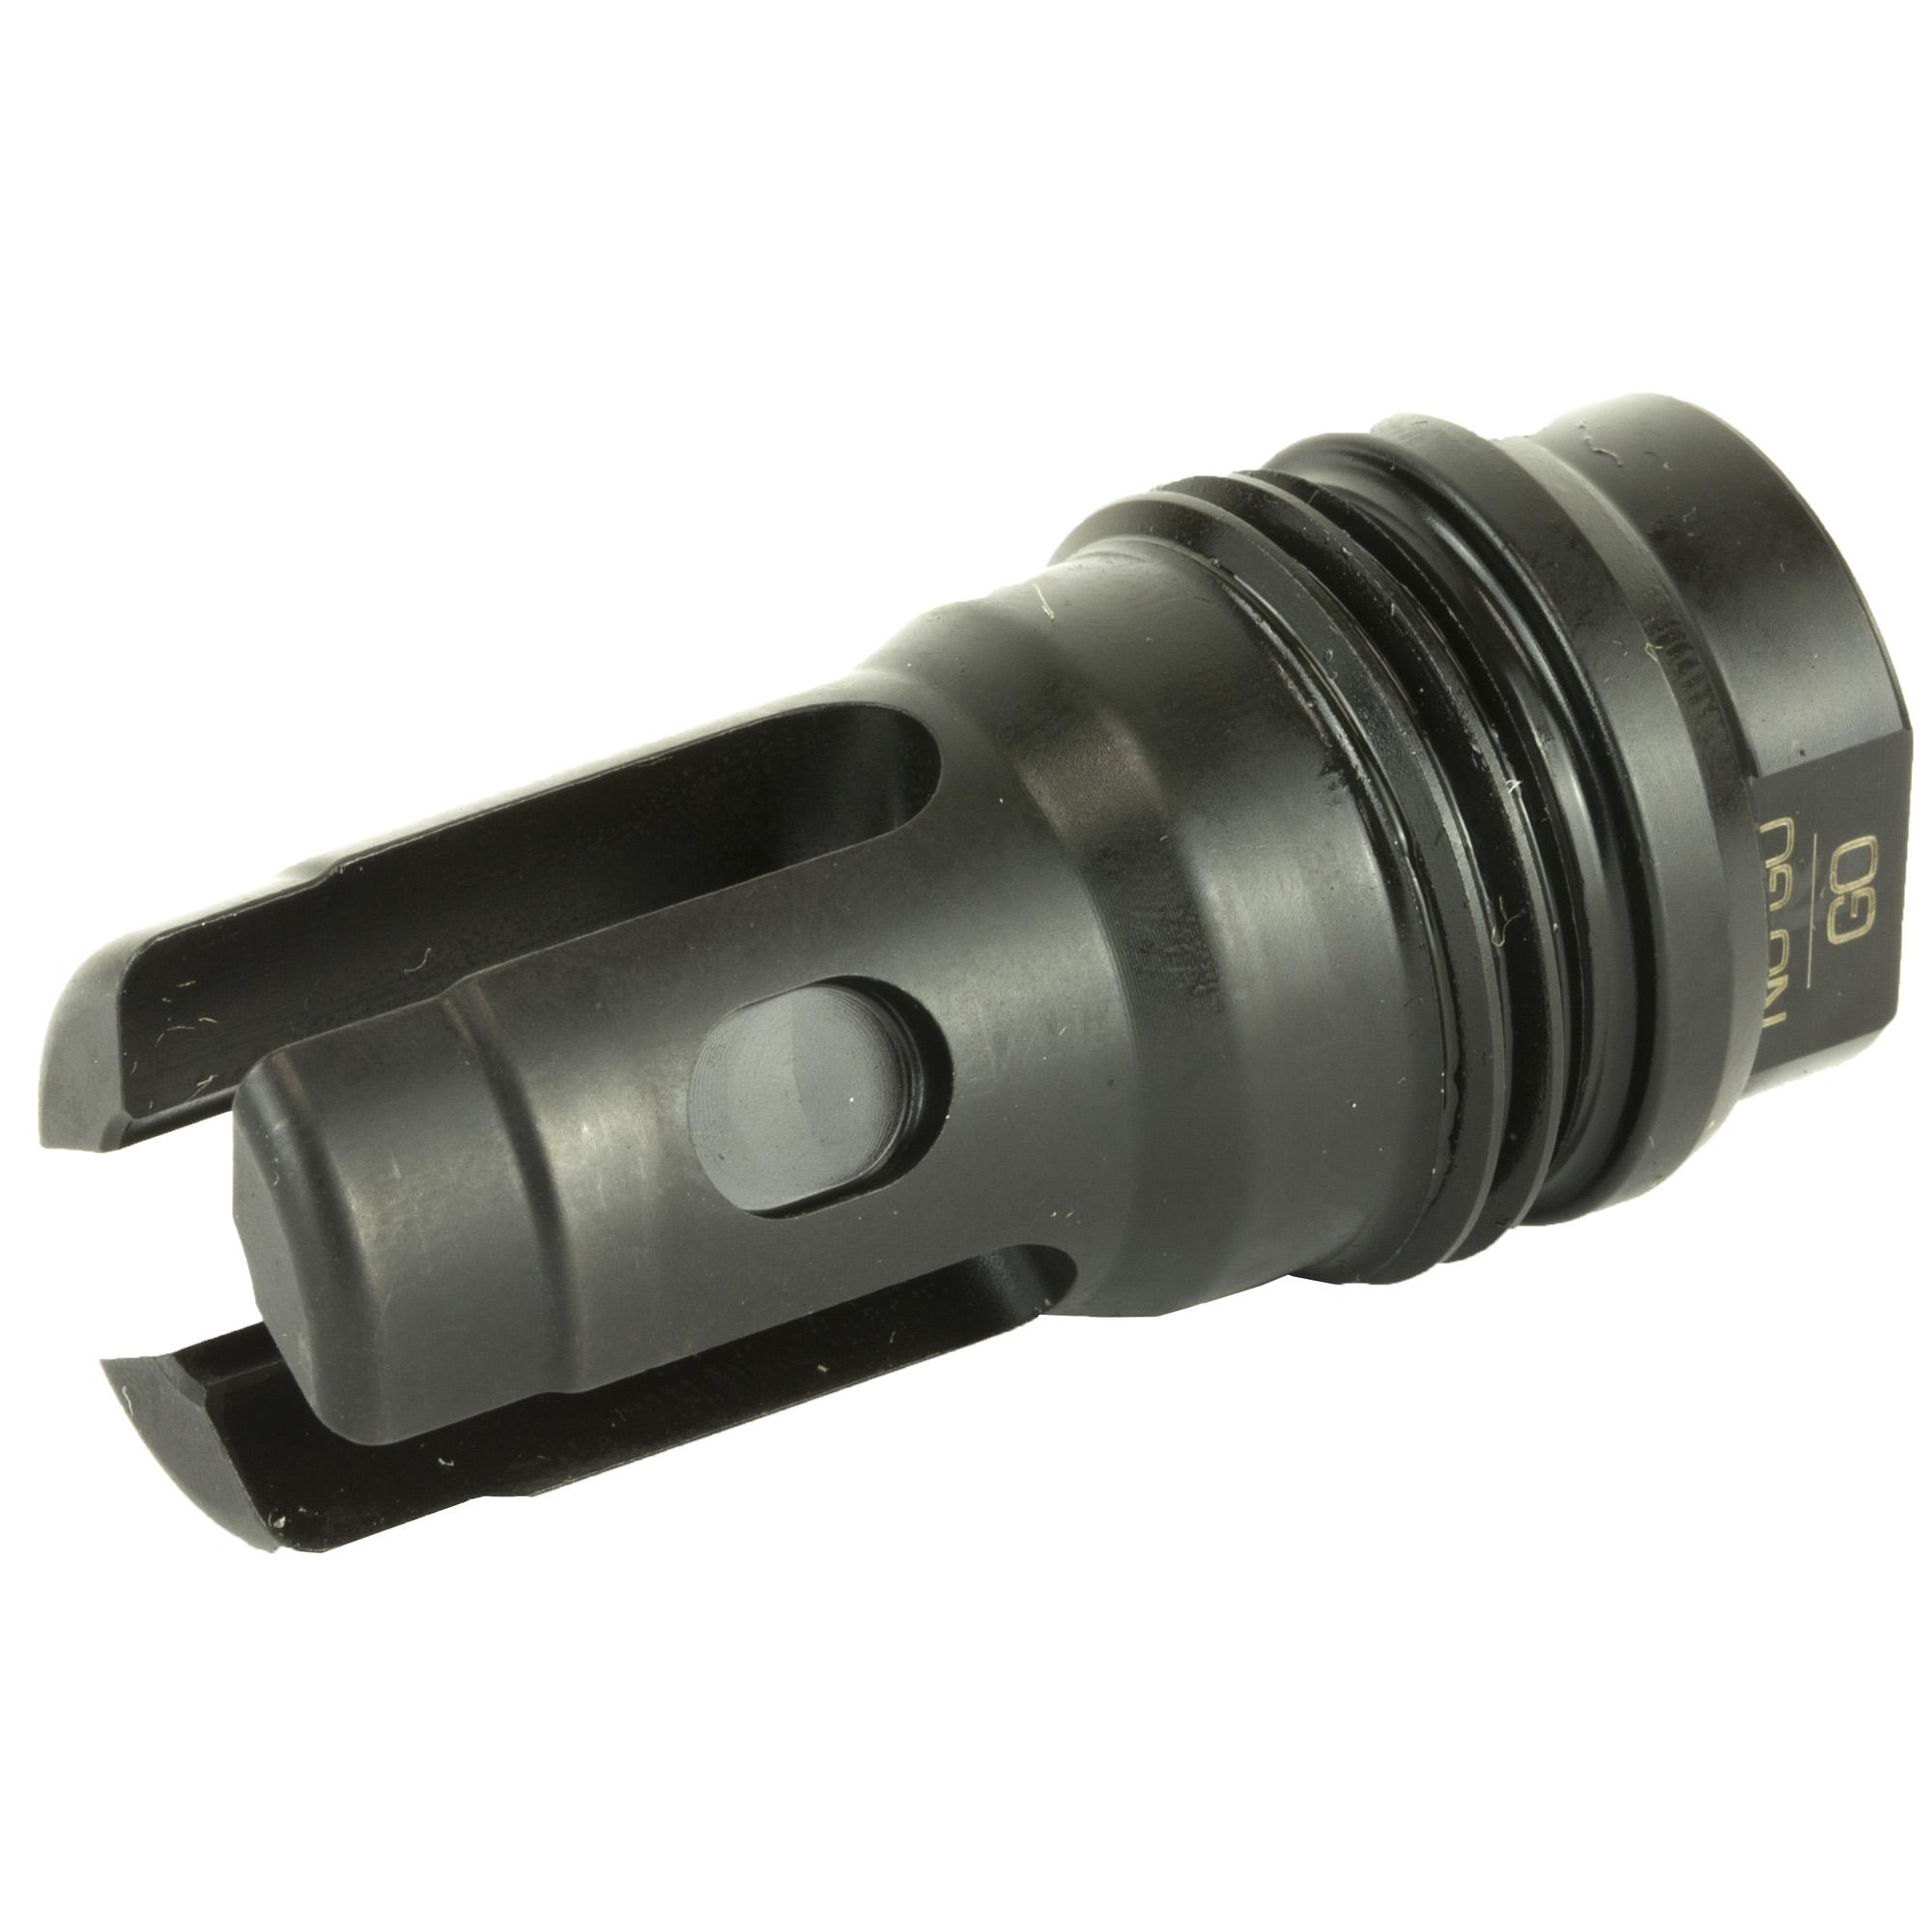 Rugged Suppressors Rugged Flash Hider 1/2x28 With 7.62